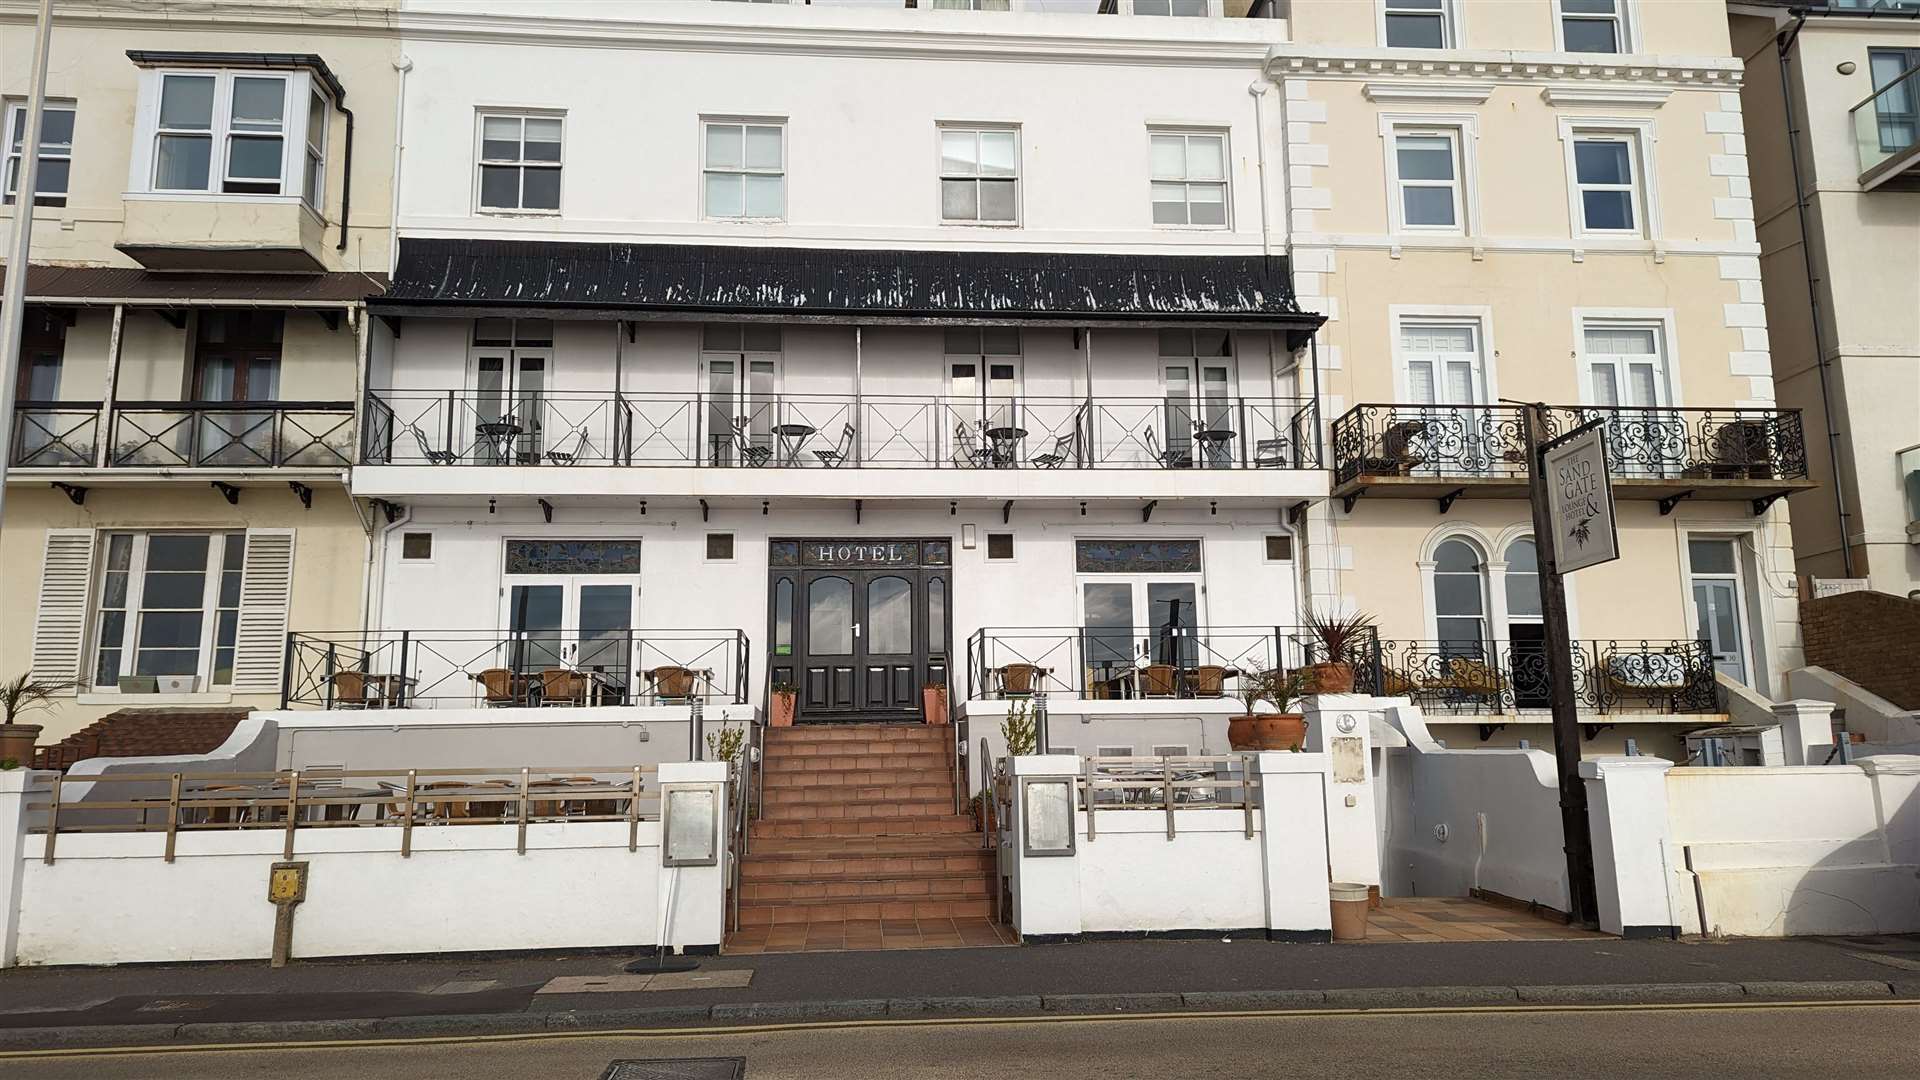 The Sandgate Hotel in Folkestone has closed with immediate effect